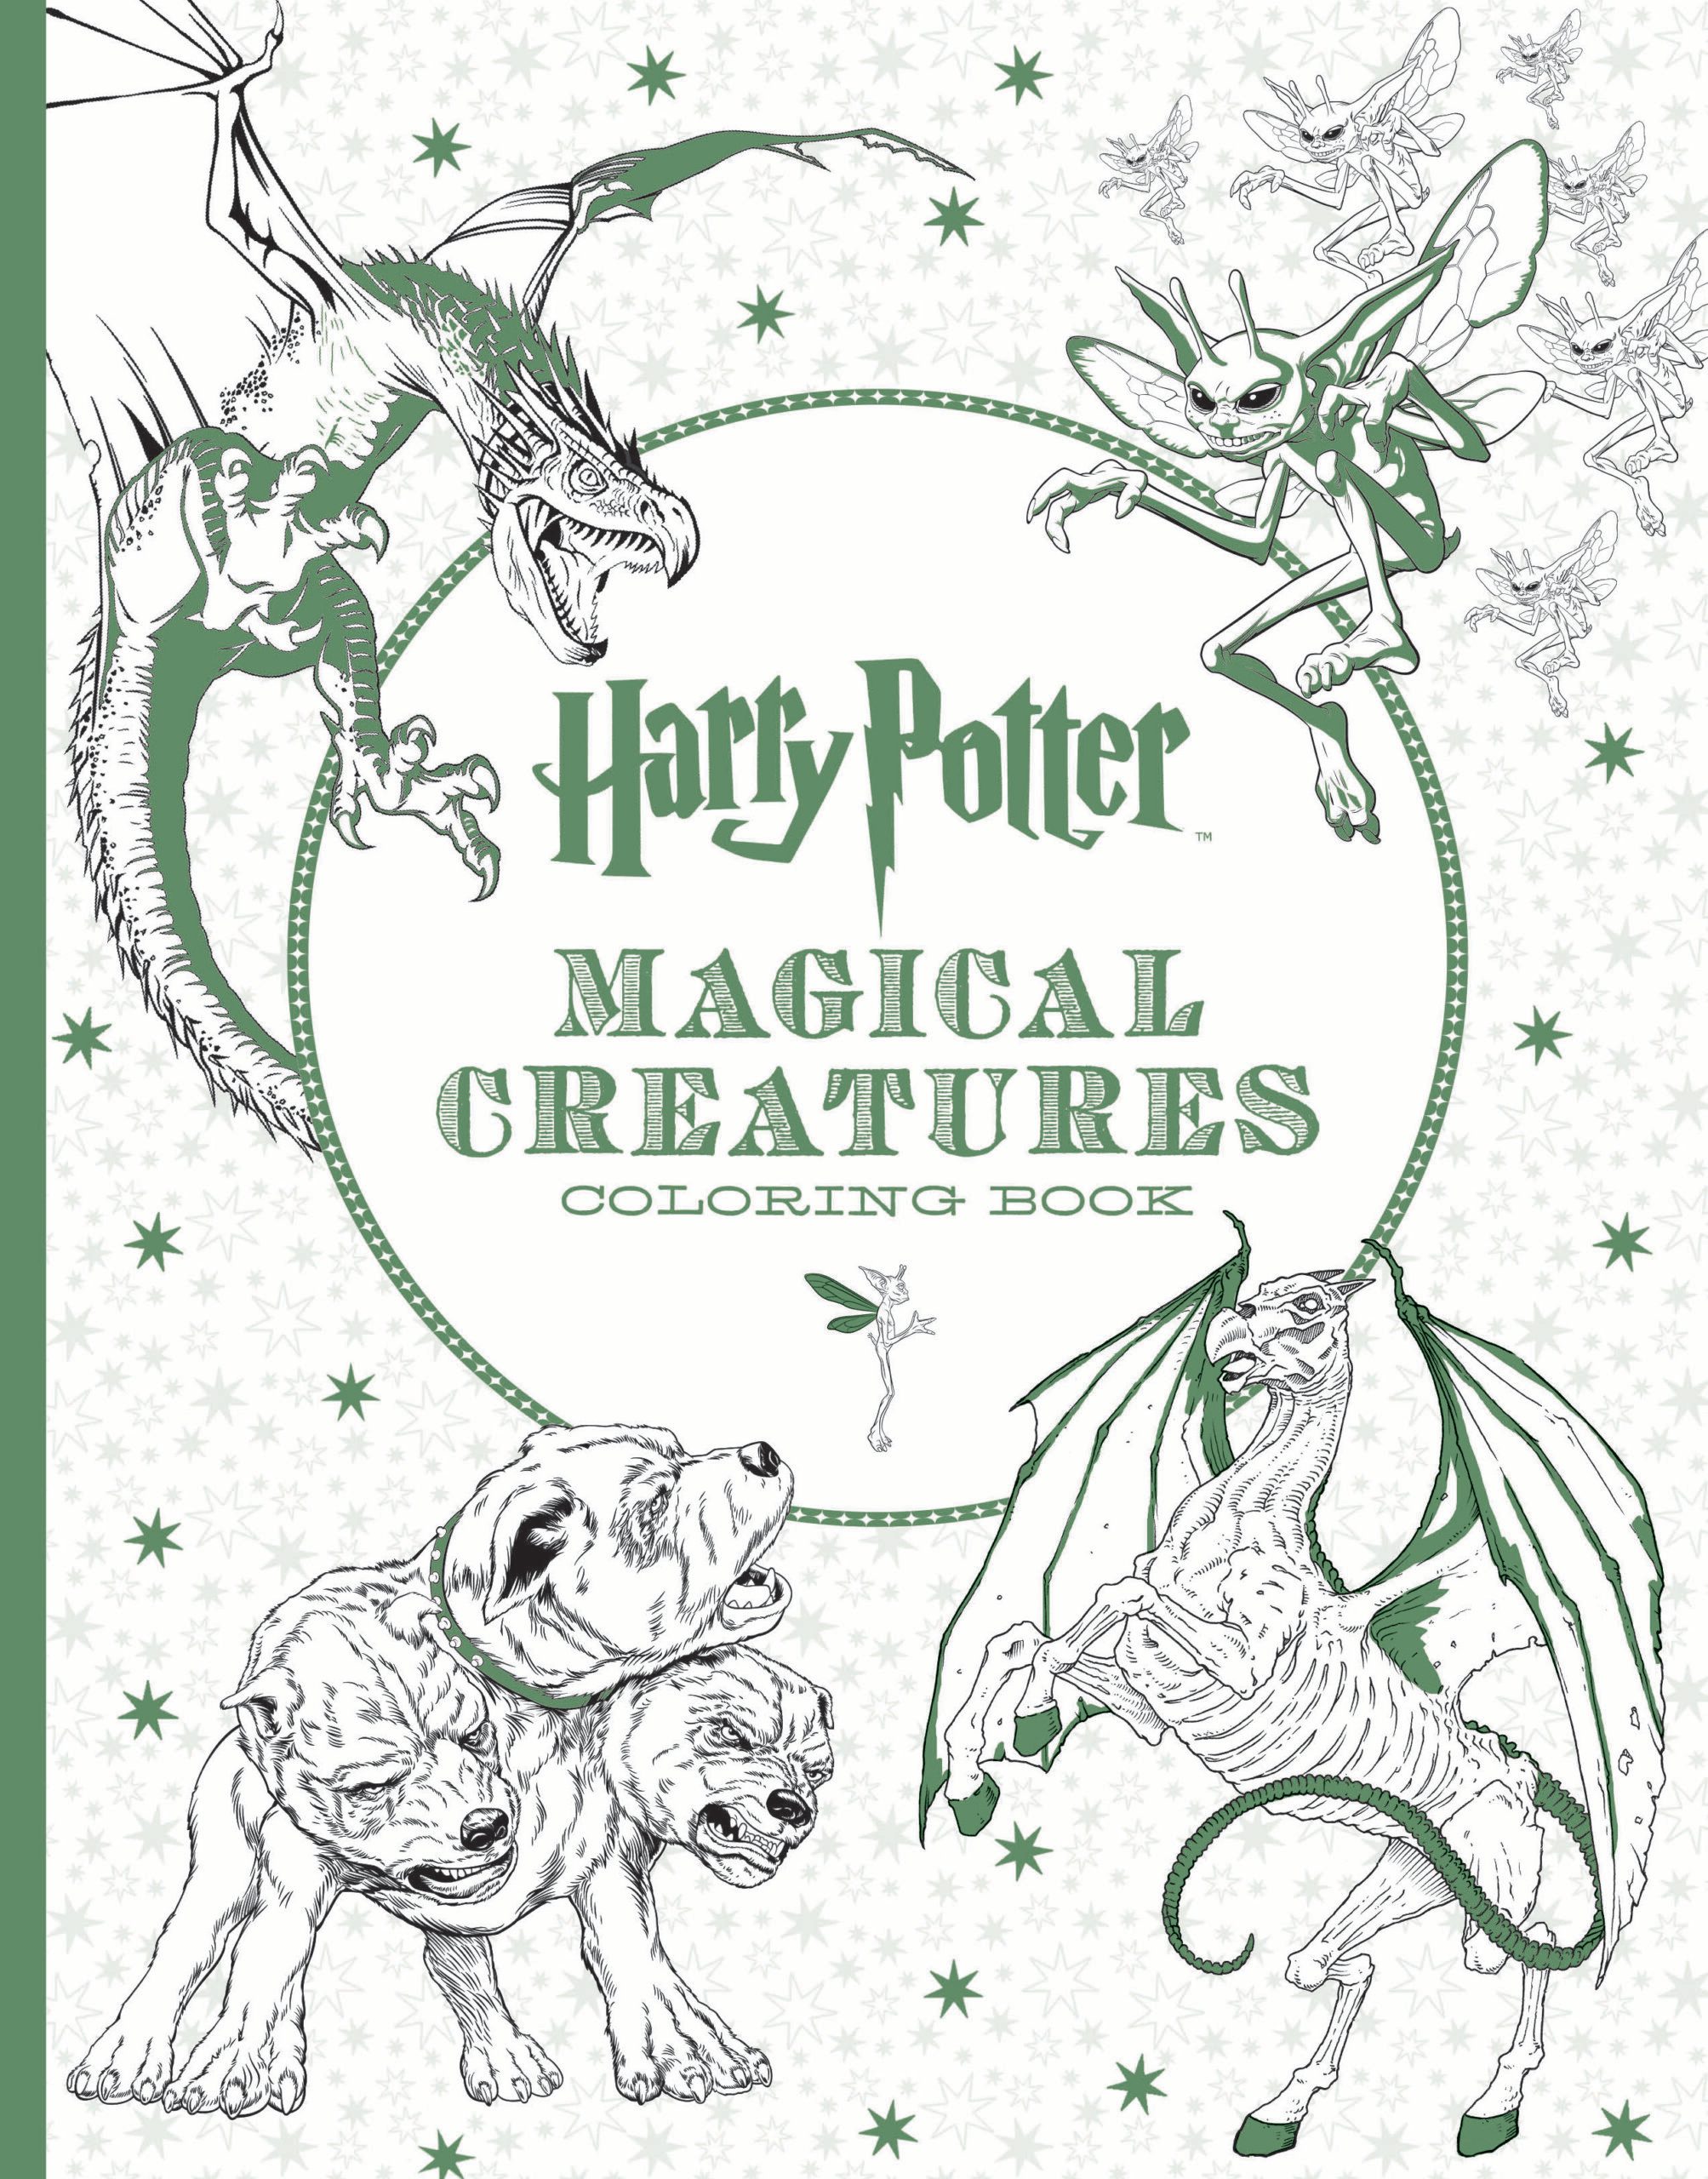 Check out the new ‘Harry Potter’ magical creatures coloring book